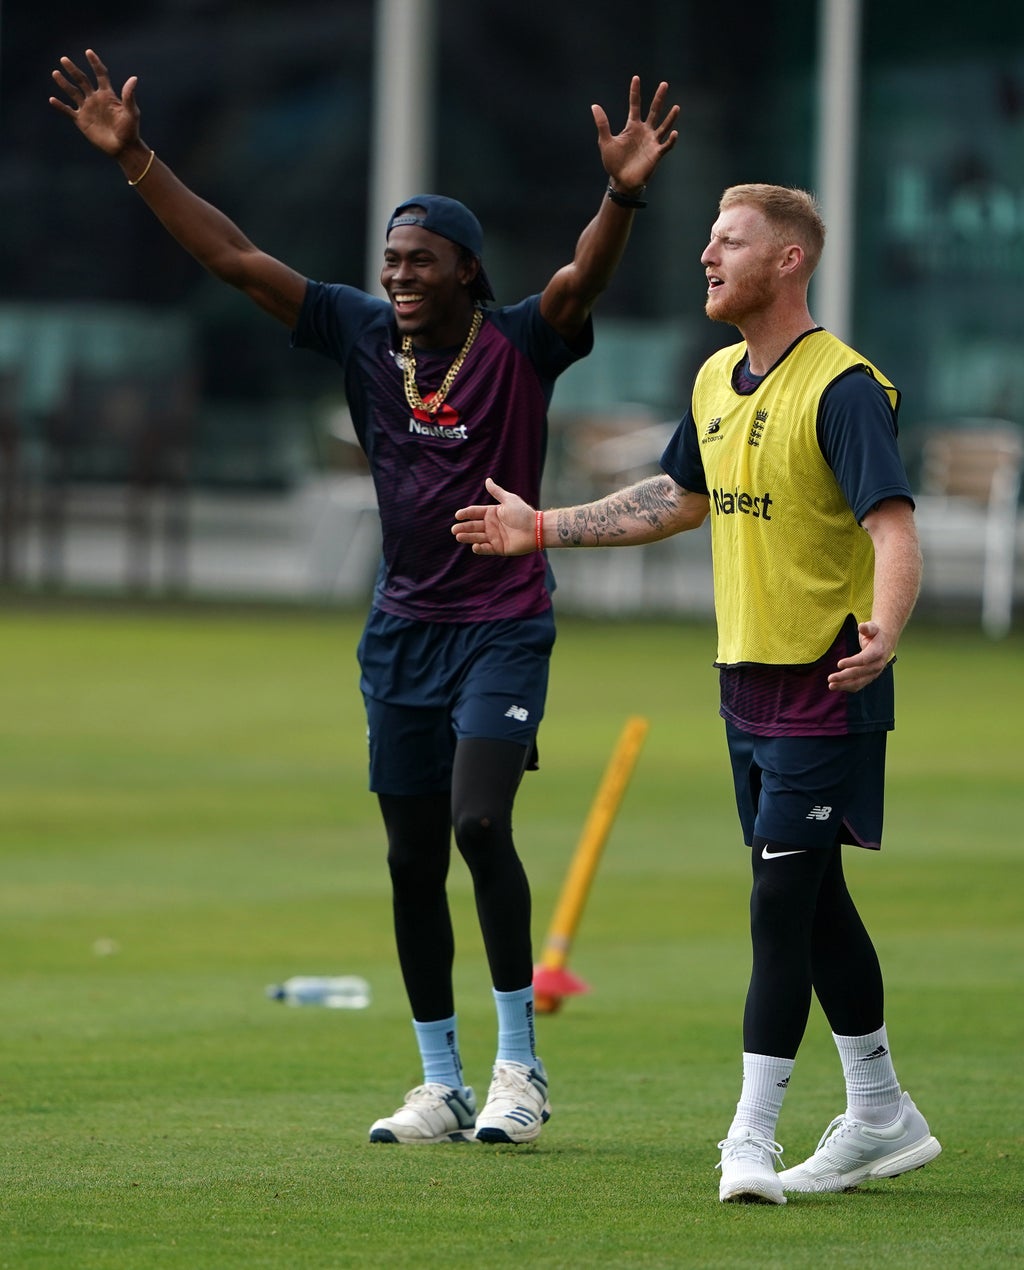 England still among T20 World Cup favourites without Stokes and Archer – Buttler